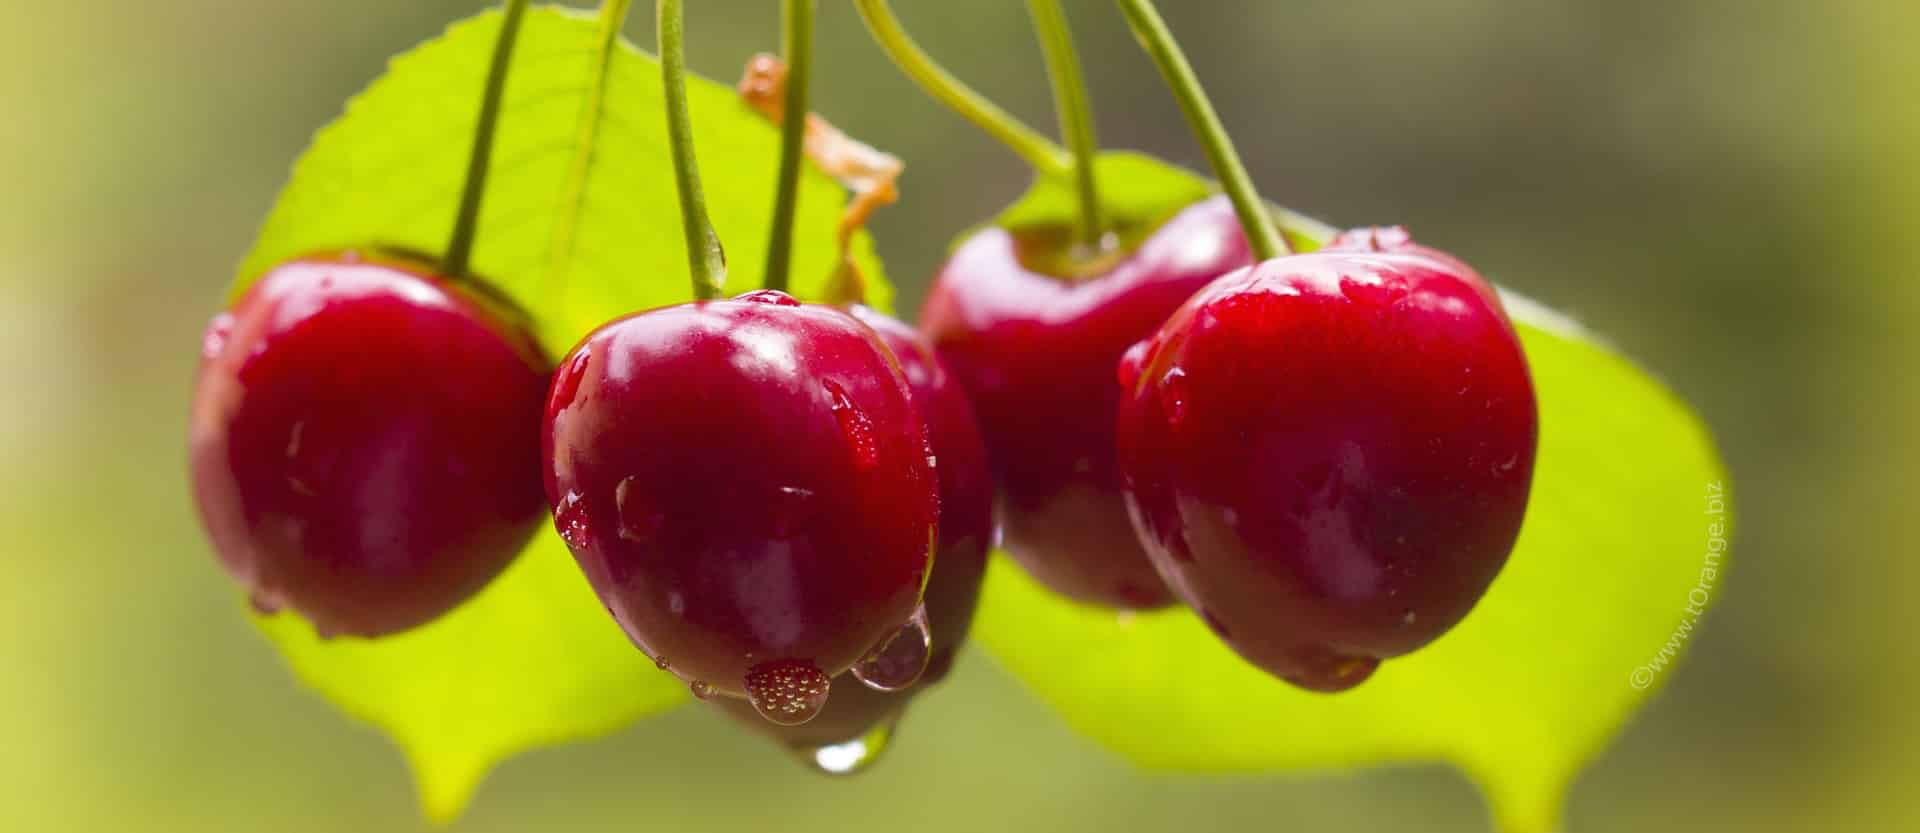 Which are More Anti-Inflammatory: Sweet Cherries or Tart ...